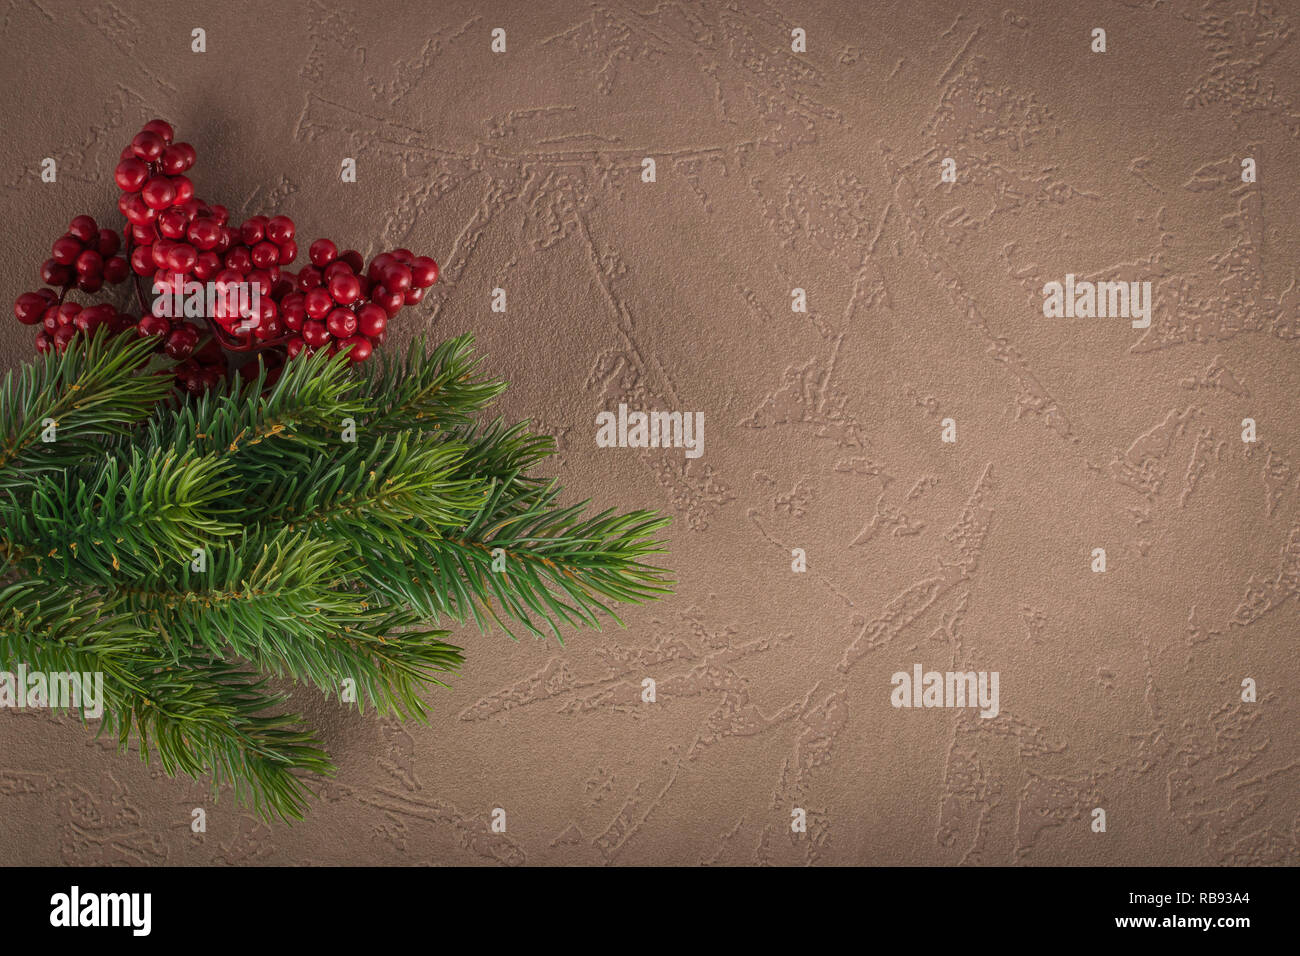 Composition of Christmas tree branch and red berries Stock Photo